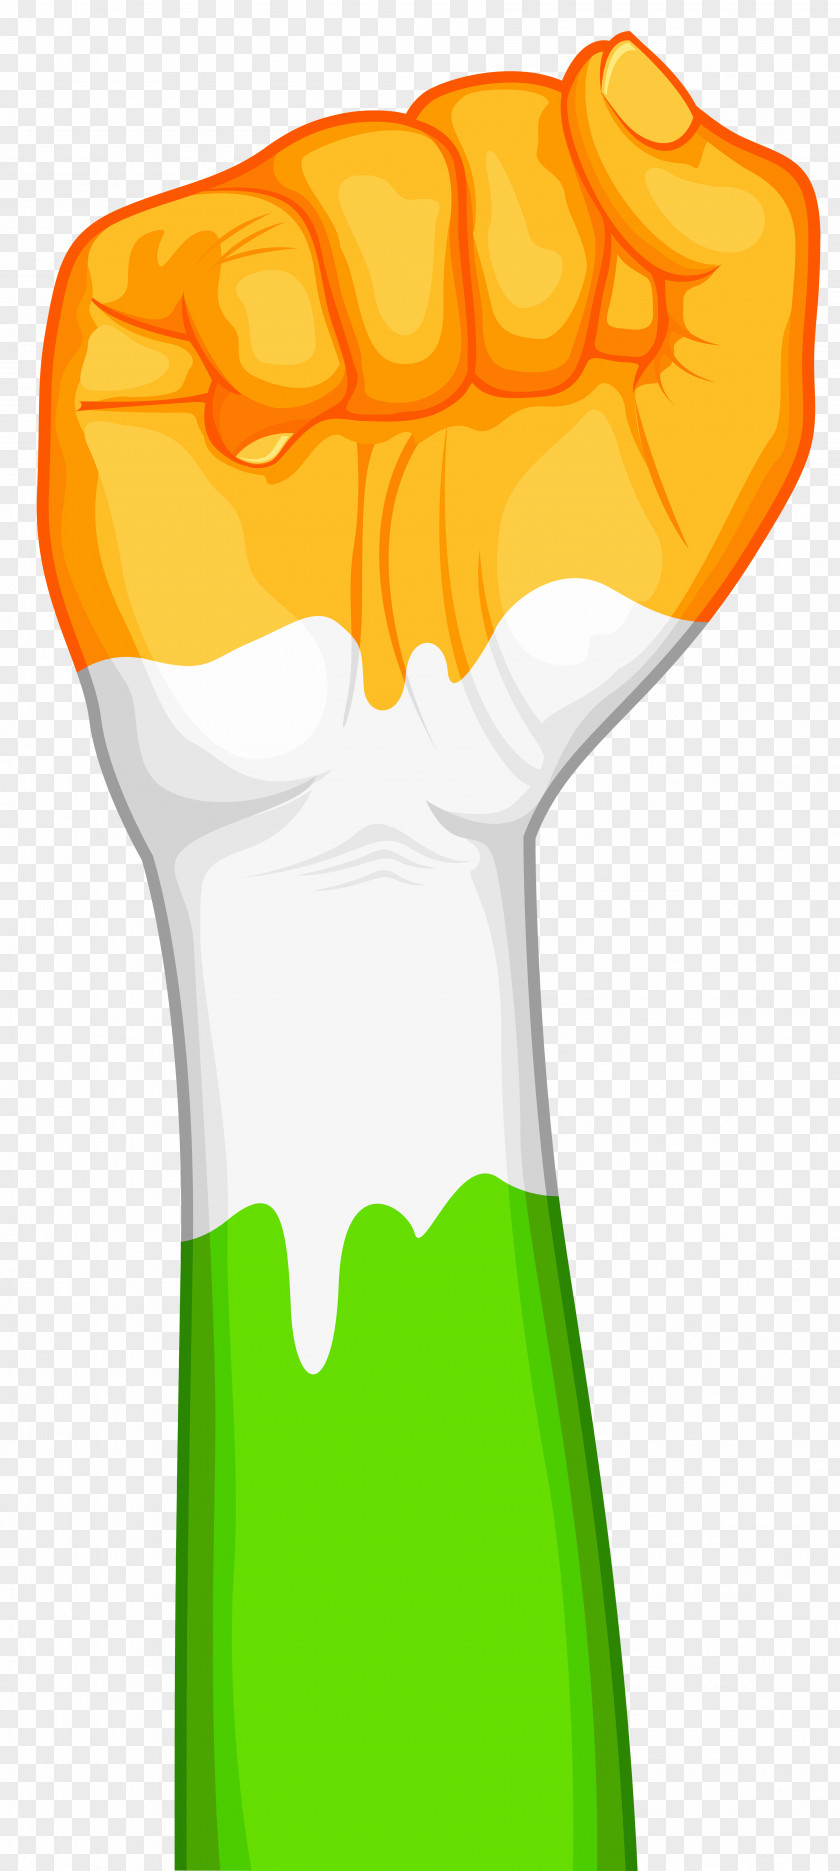 India Fist Transparent Image Indian Independence Day Republic January 26 Wallpaper PNG